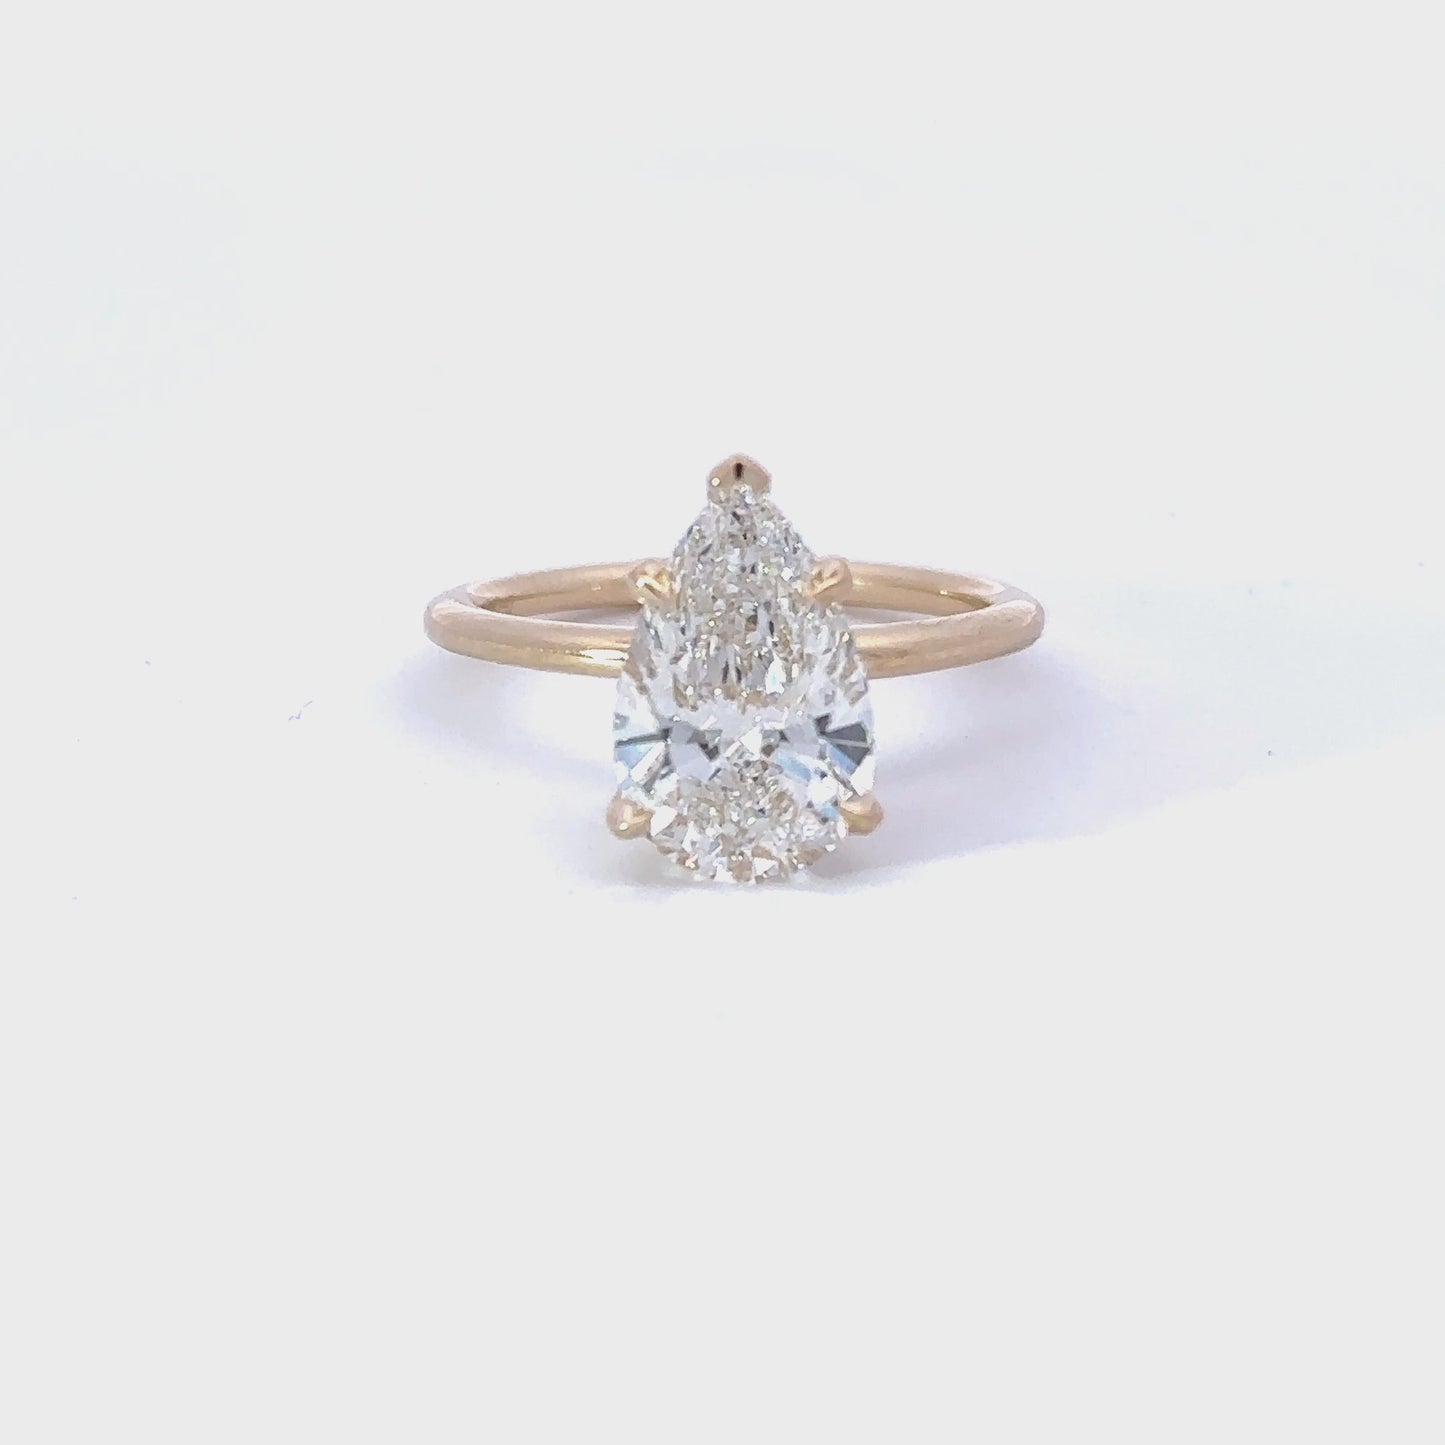 2.00-2.99 Carat Pear Lab Grown Diamond Engagement Ring with Hidden Halo